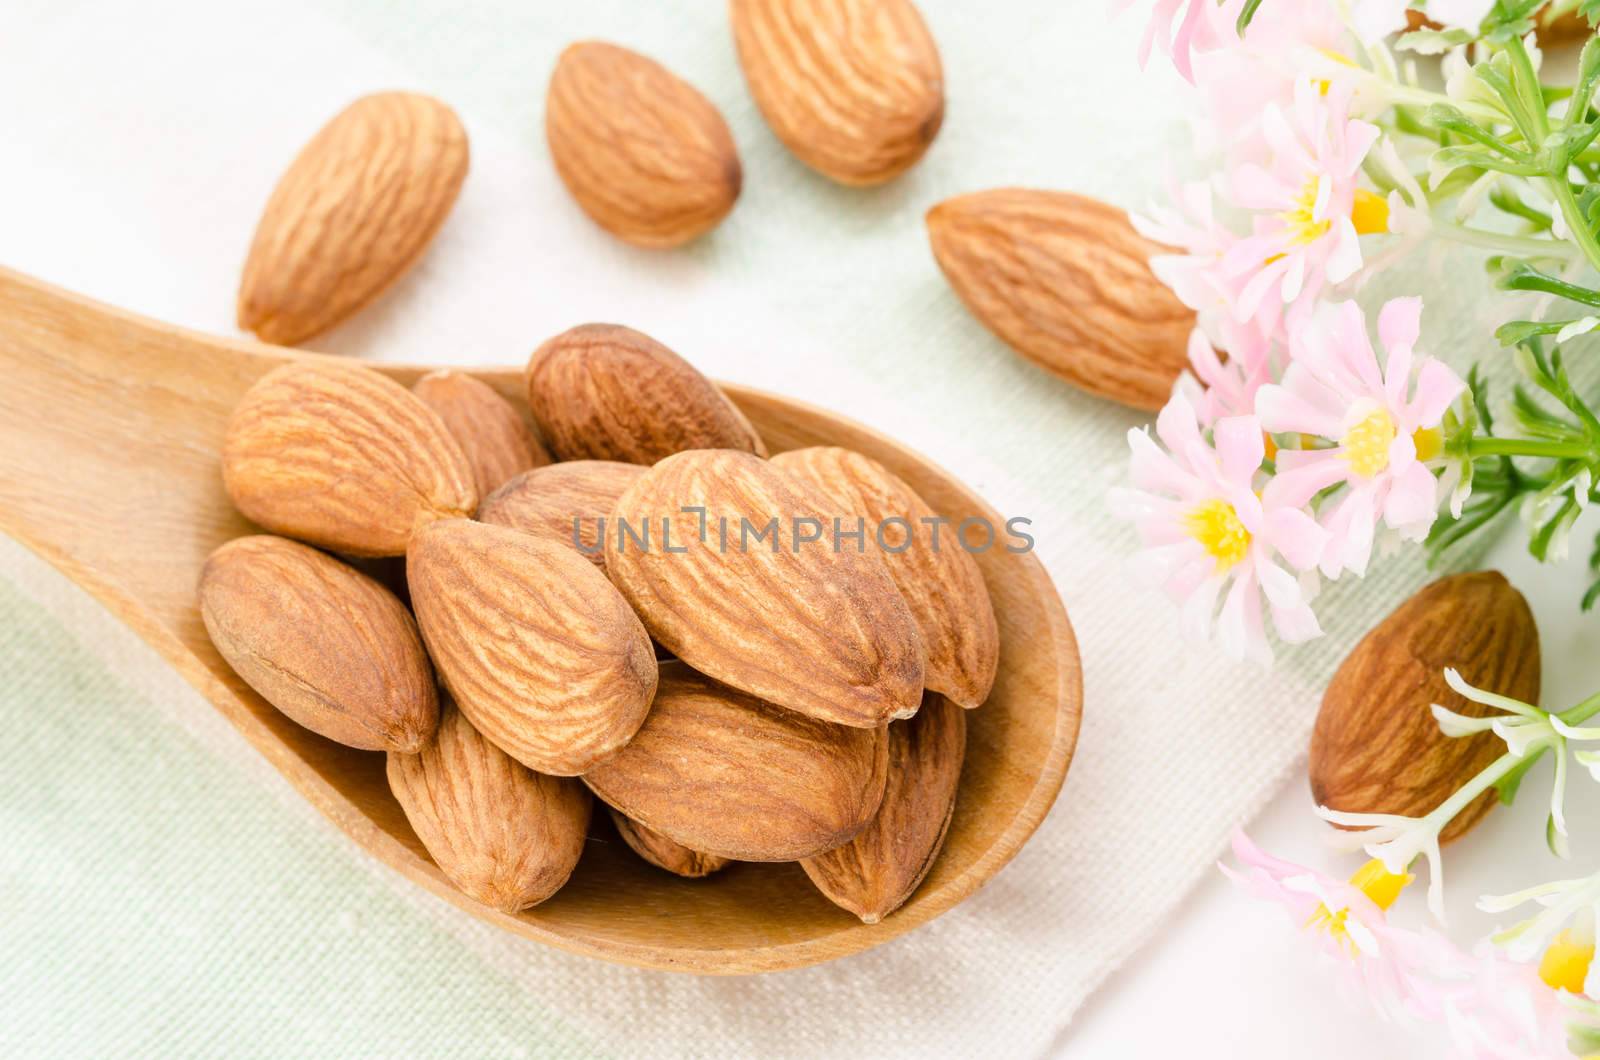 Almonds in wooden spoon with flower on tablecloth background.